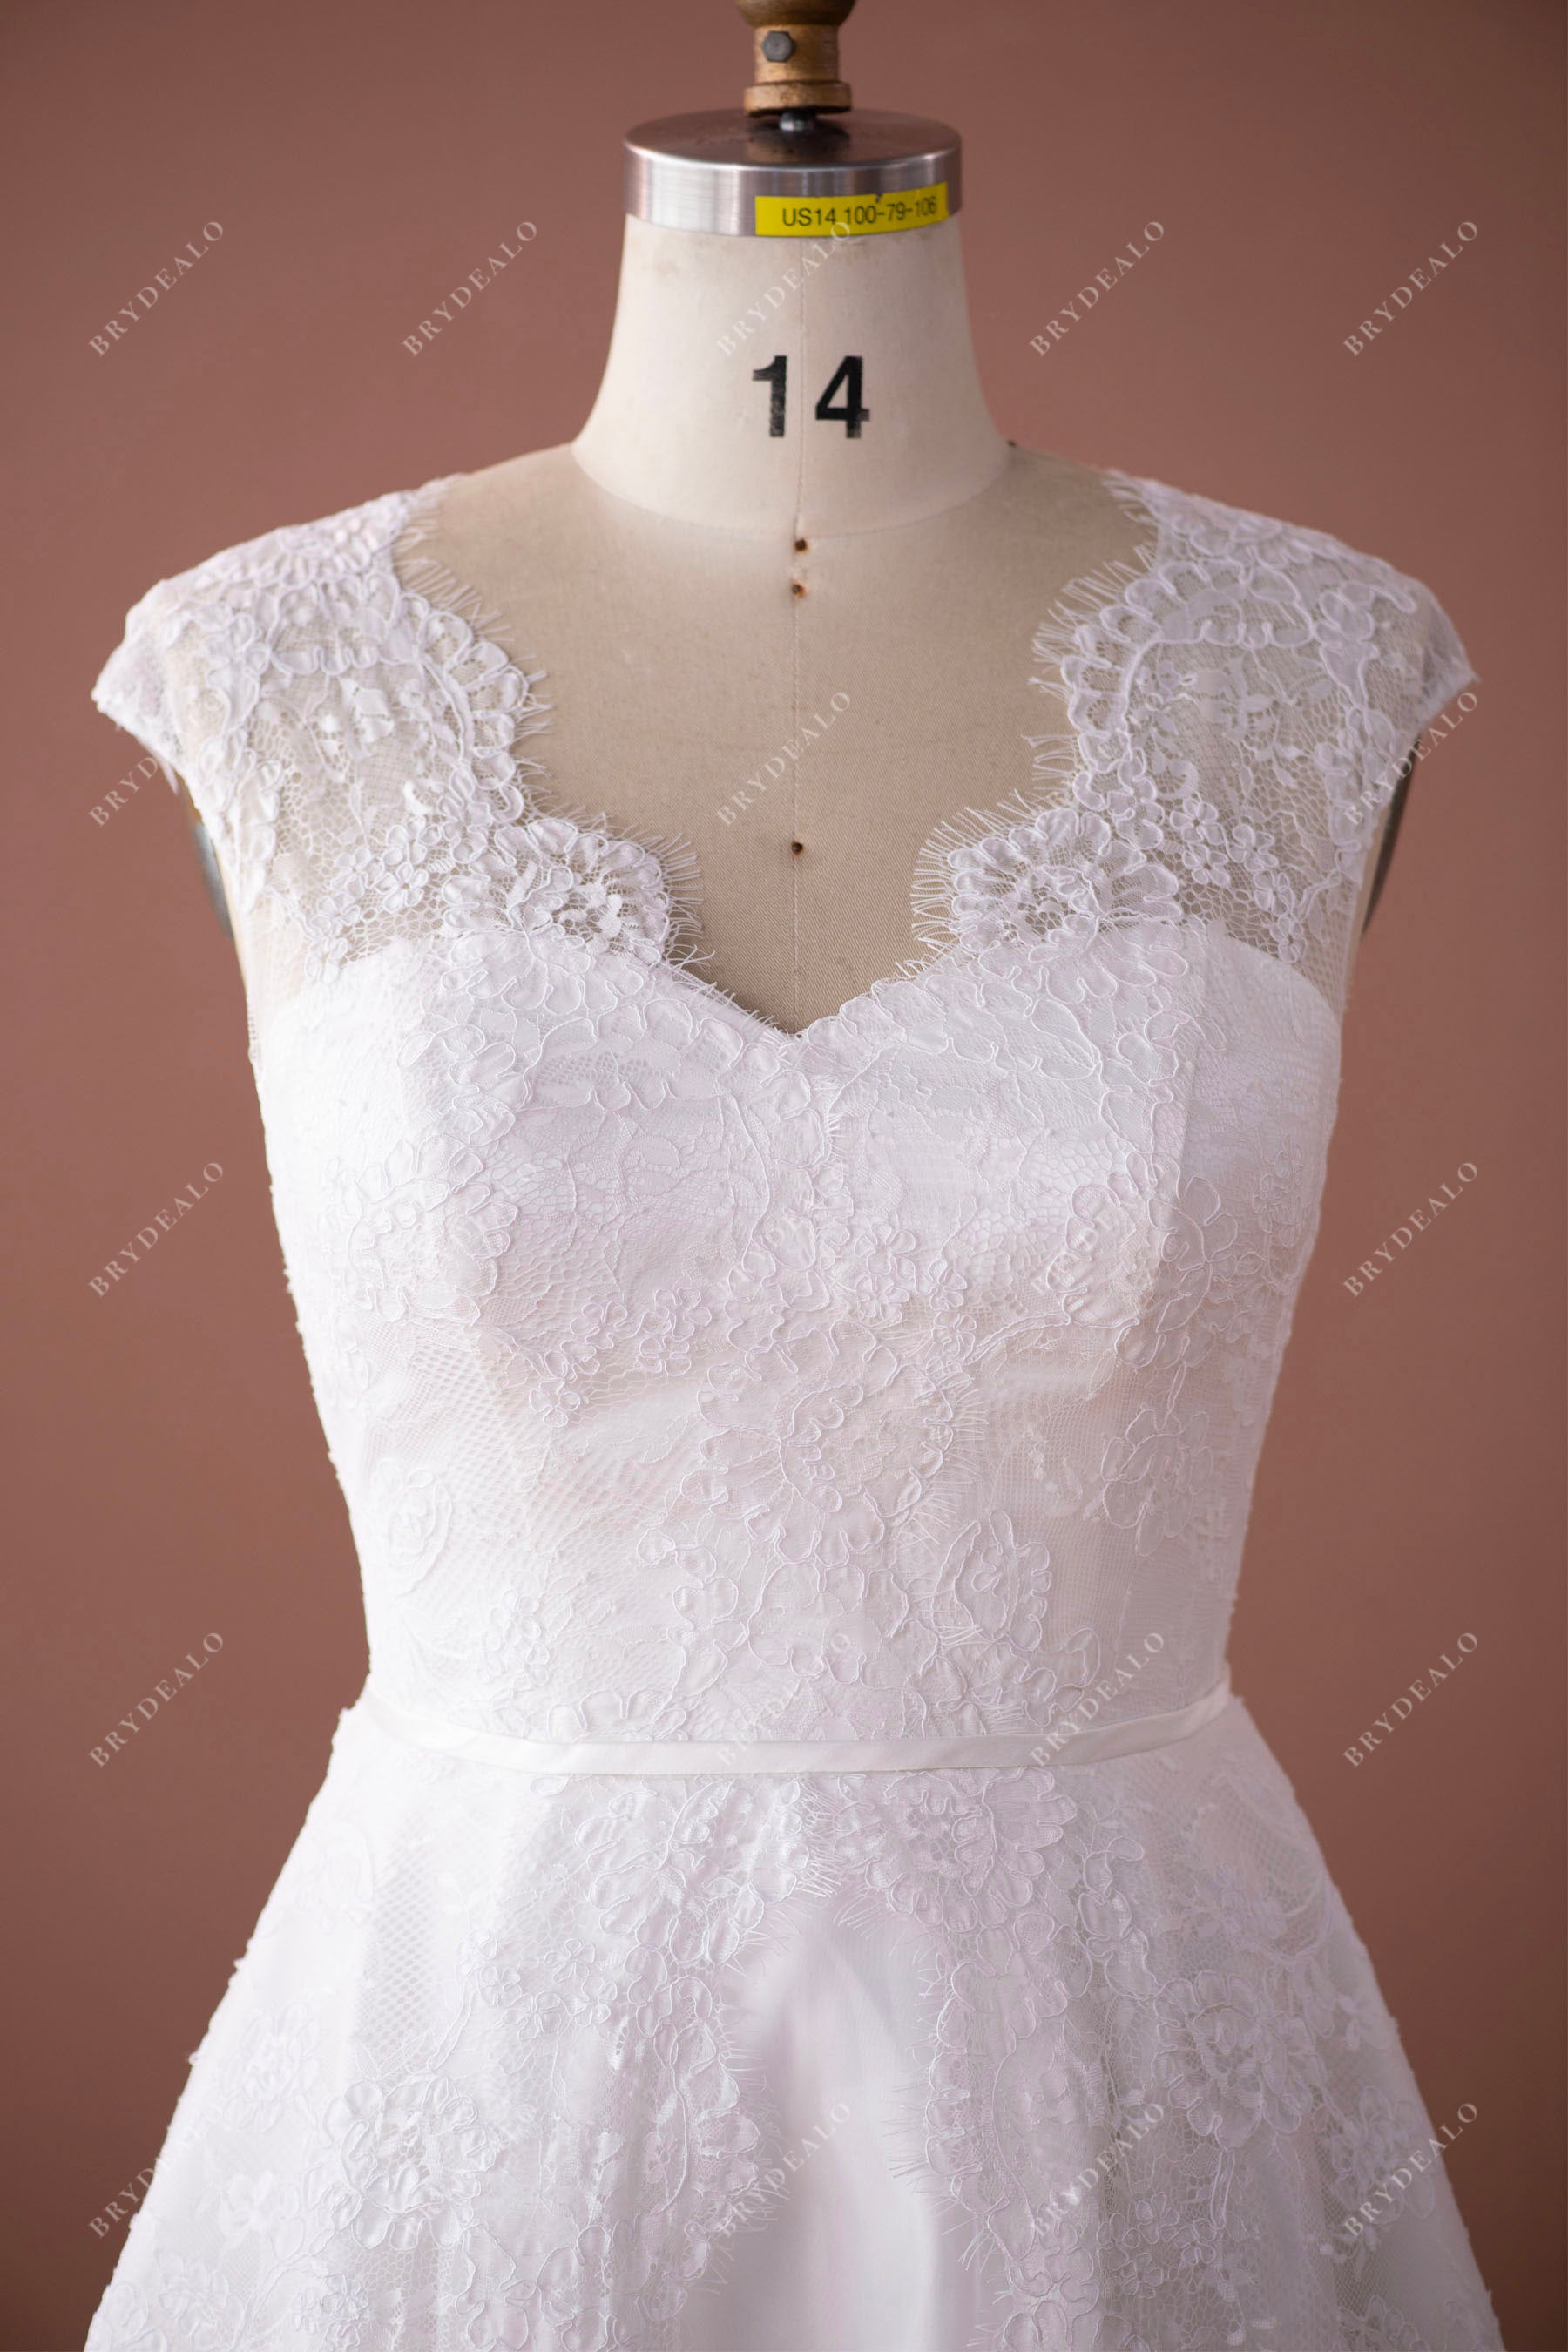 scalloped neck lace wedding gown